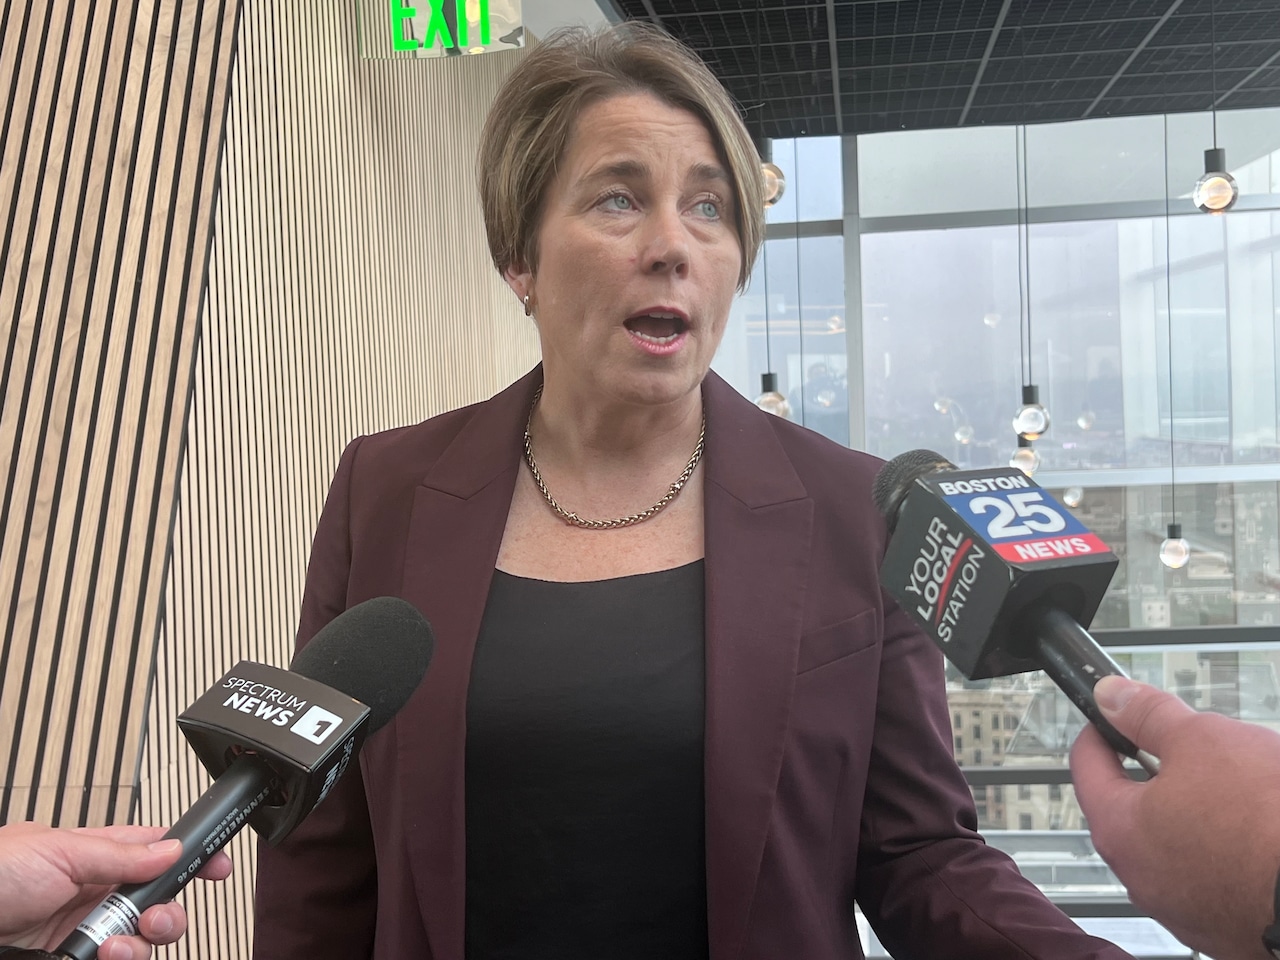 With team at the border, Mass. Gov. Healey keeps pressure on Congress to fix immigration [Video]